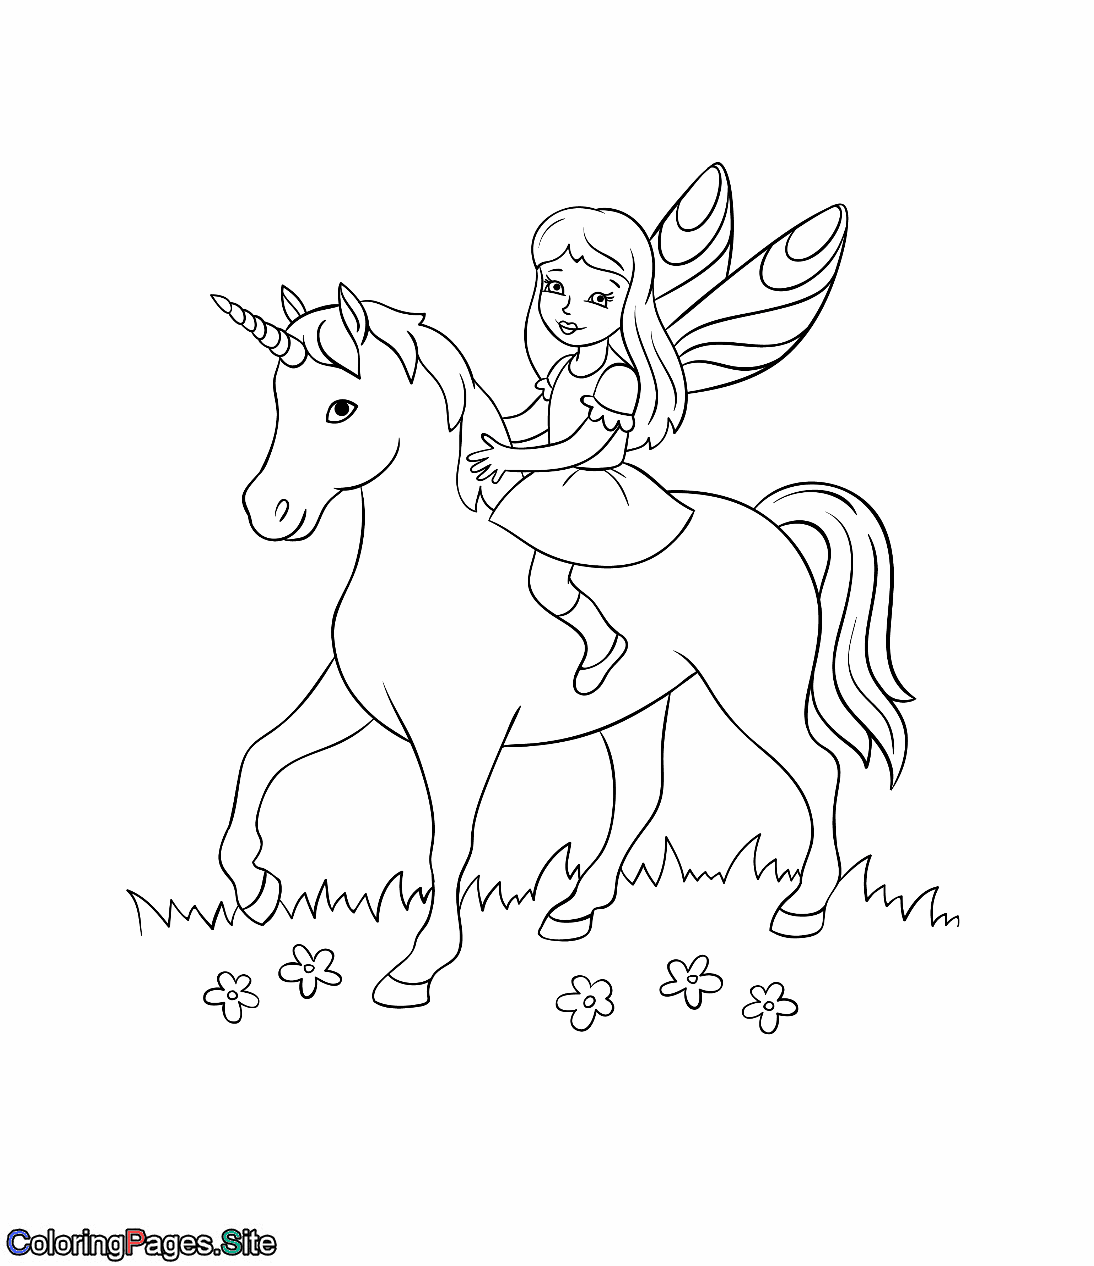 Fairy riding a unicorn coloring page online